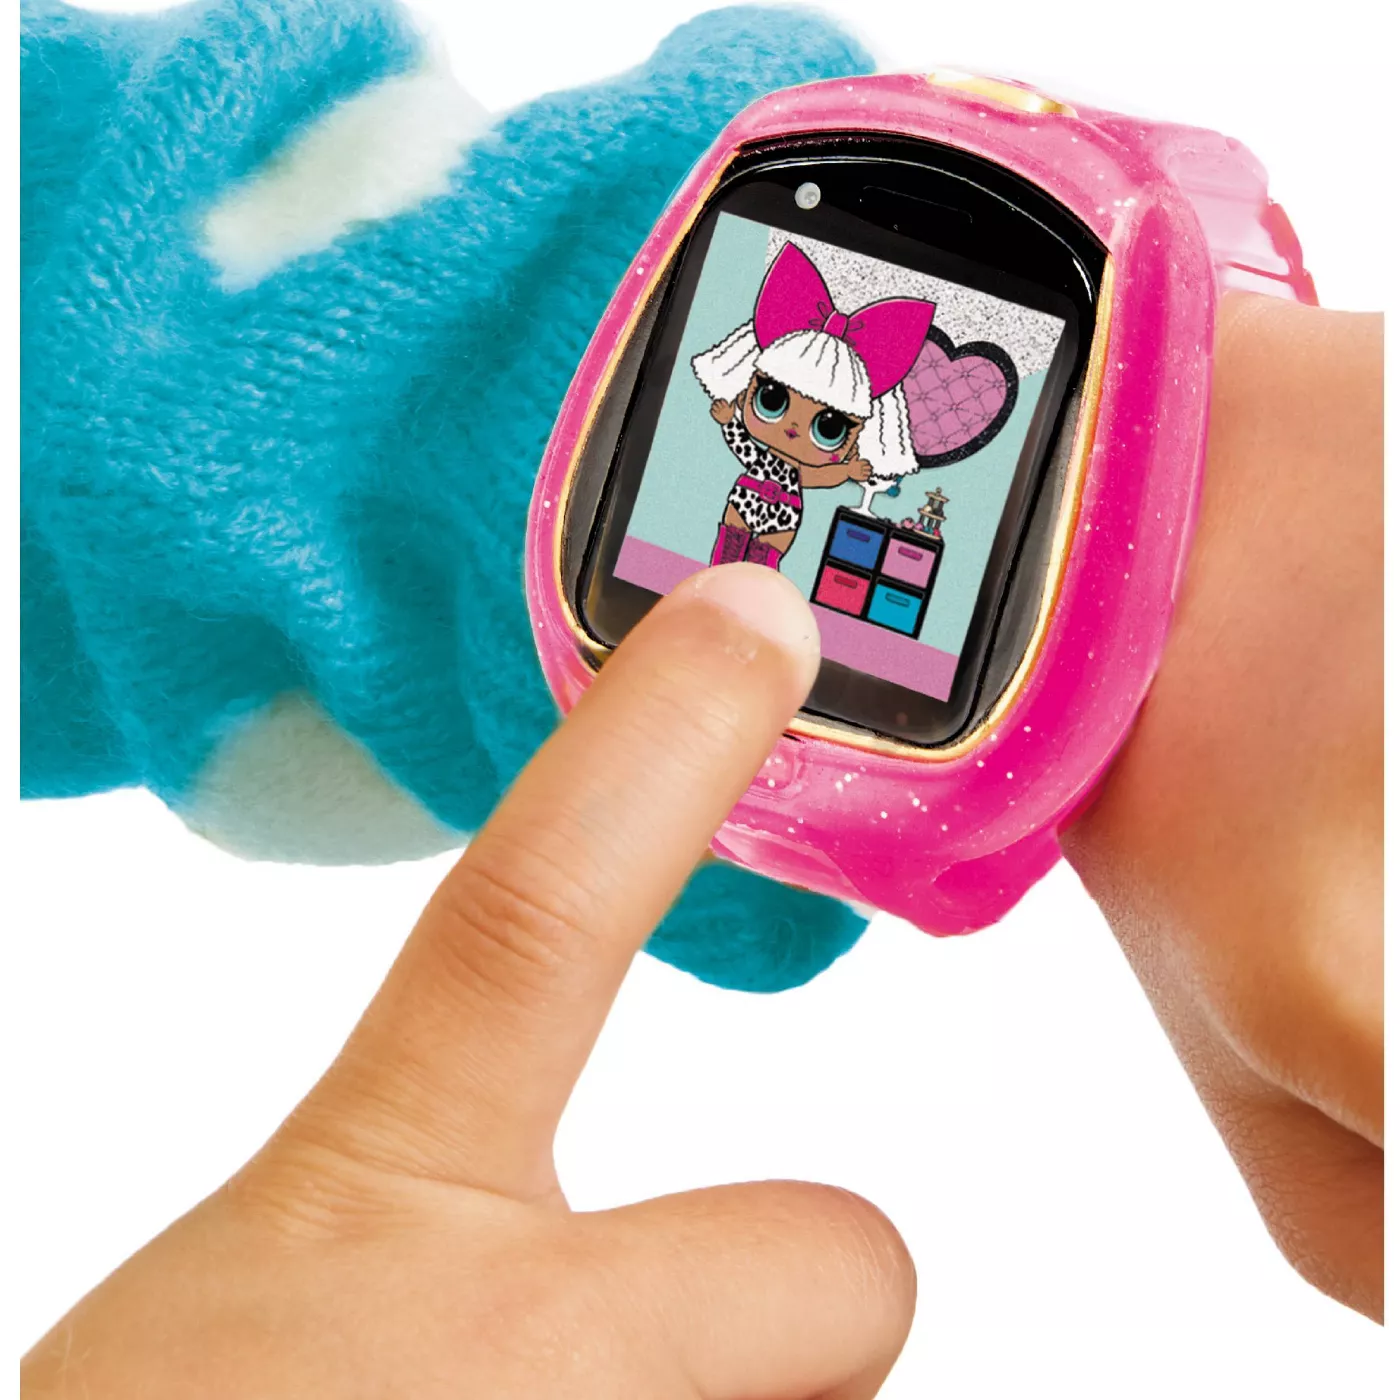 L.O.L. Surprise! Smartwatch! Pink -  Camera, Video, Games, Activities and More - £15.81 GBP